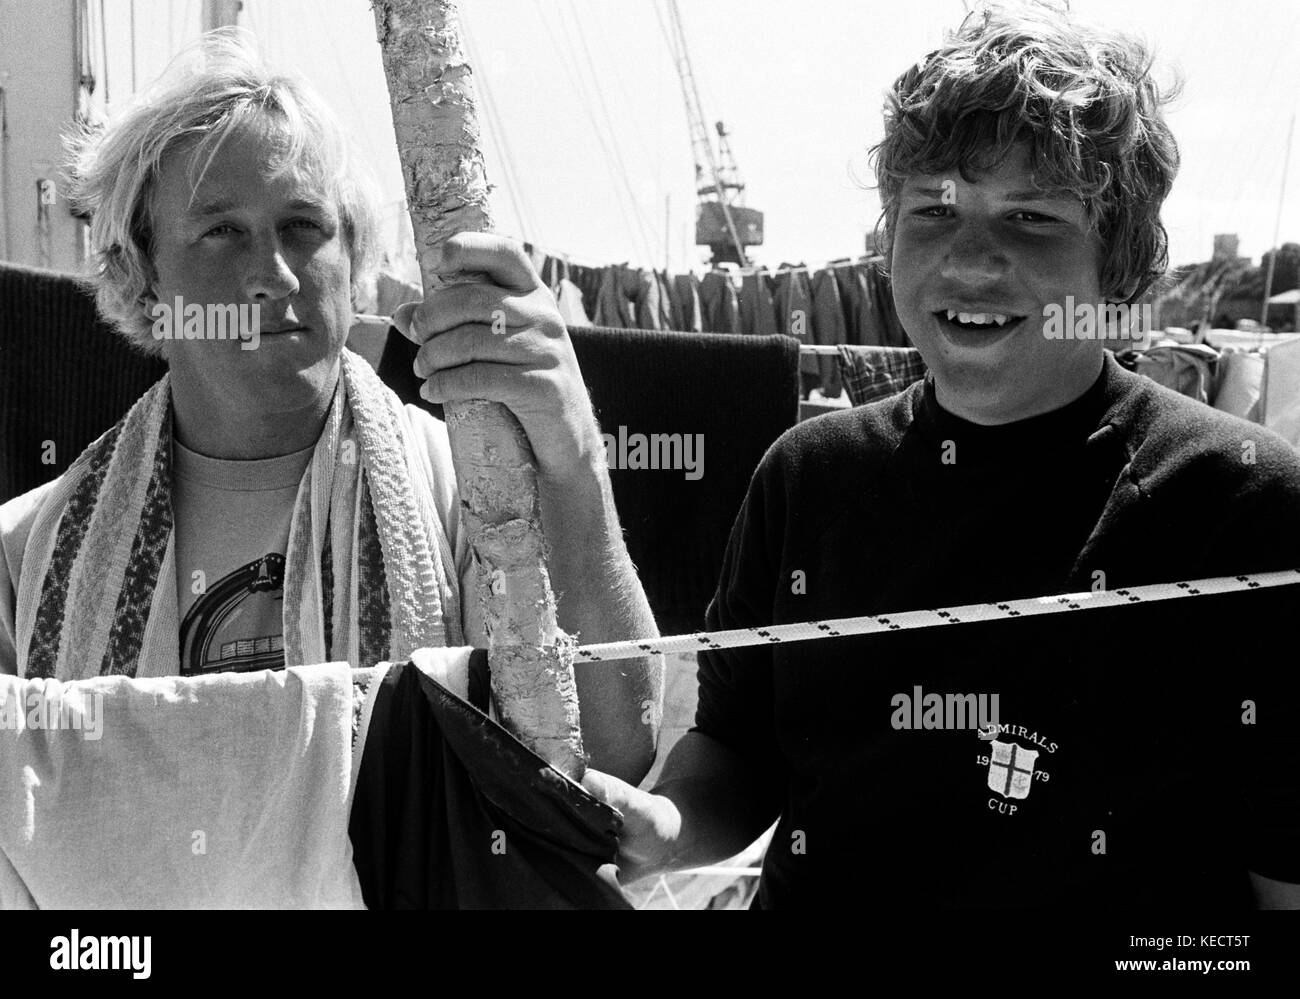 AJAXNETPHOTO. 17TH AUGUST, 1979. PLYMOUTH, ENGLAND. - YACHT CREW - (L-R) COURTENY JENKINS FROM OWINGS MILLS, MD. AND TEDDY TURNER IV OF ATLANTA, SON OF YACHT OWNER AND SKIPPER TED TURNER, RELAX ON BOARD THE YACHT AT MILLBAY AFTER FINISHING THE STORMY 605 MILE FASTNET RACE. PHOTO:JONATHAN EASTLAND/AJAX REF:791708 1 Stock Photo